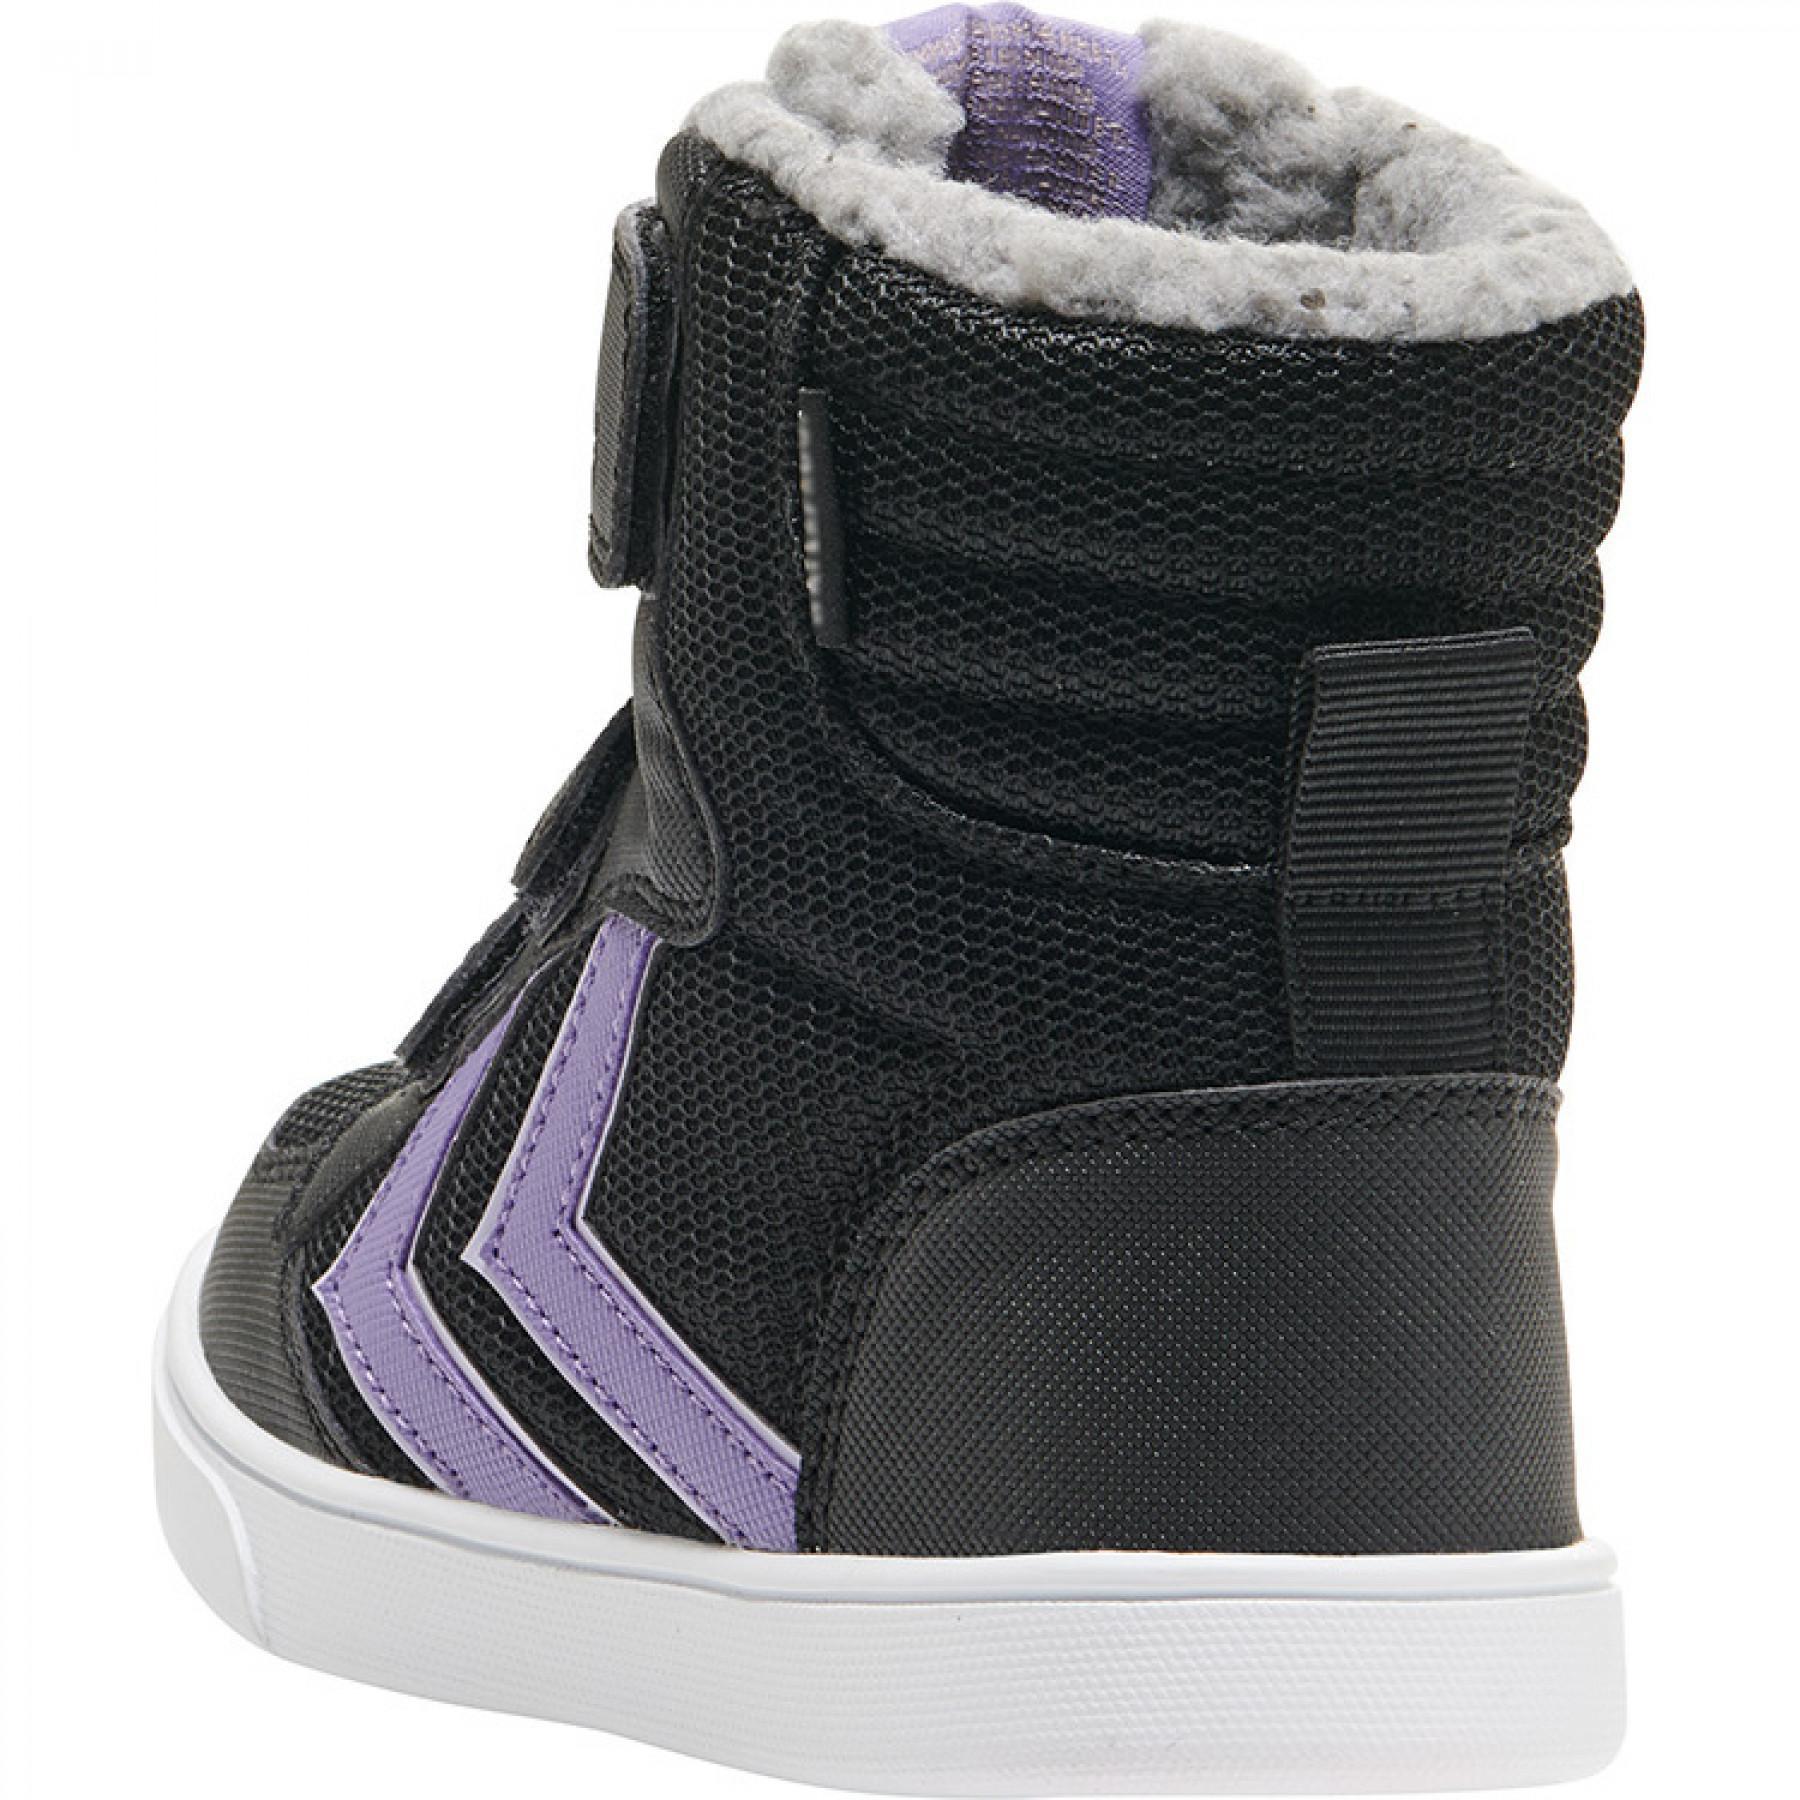 Children's sneakers Hummel stadil poly boot mid